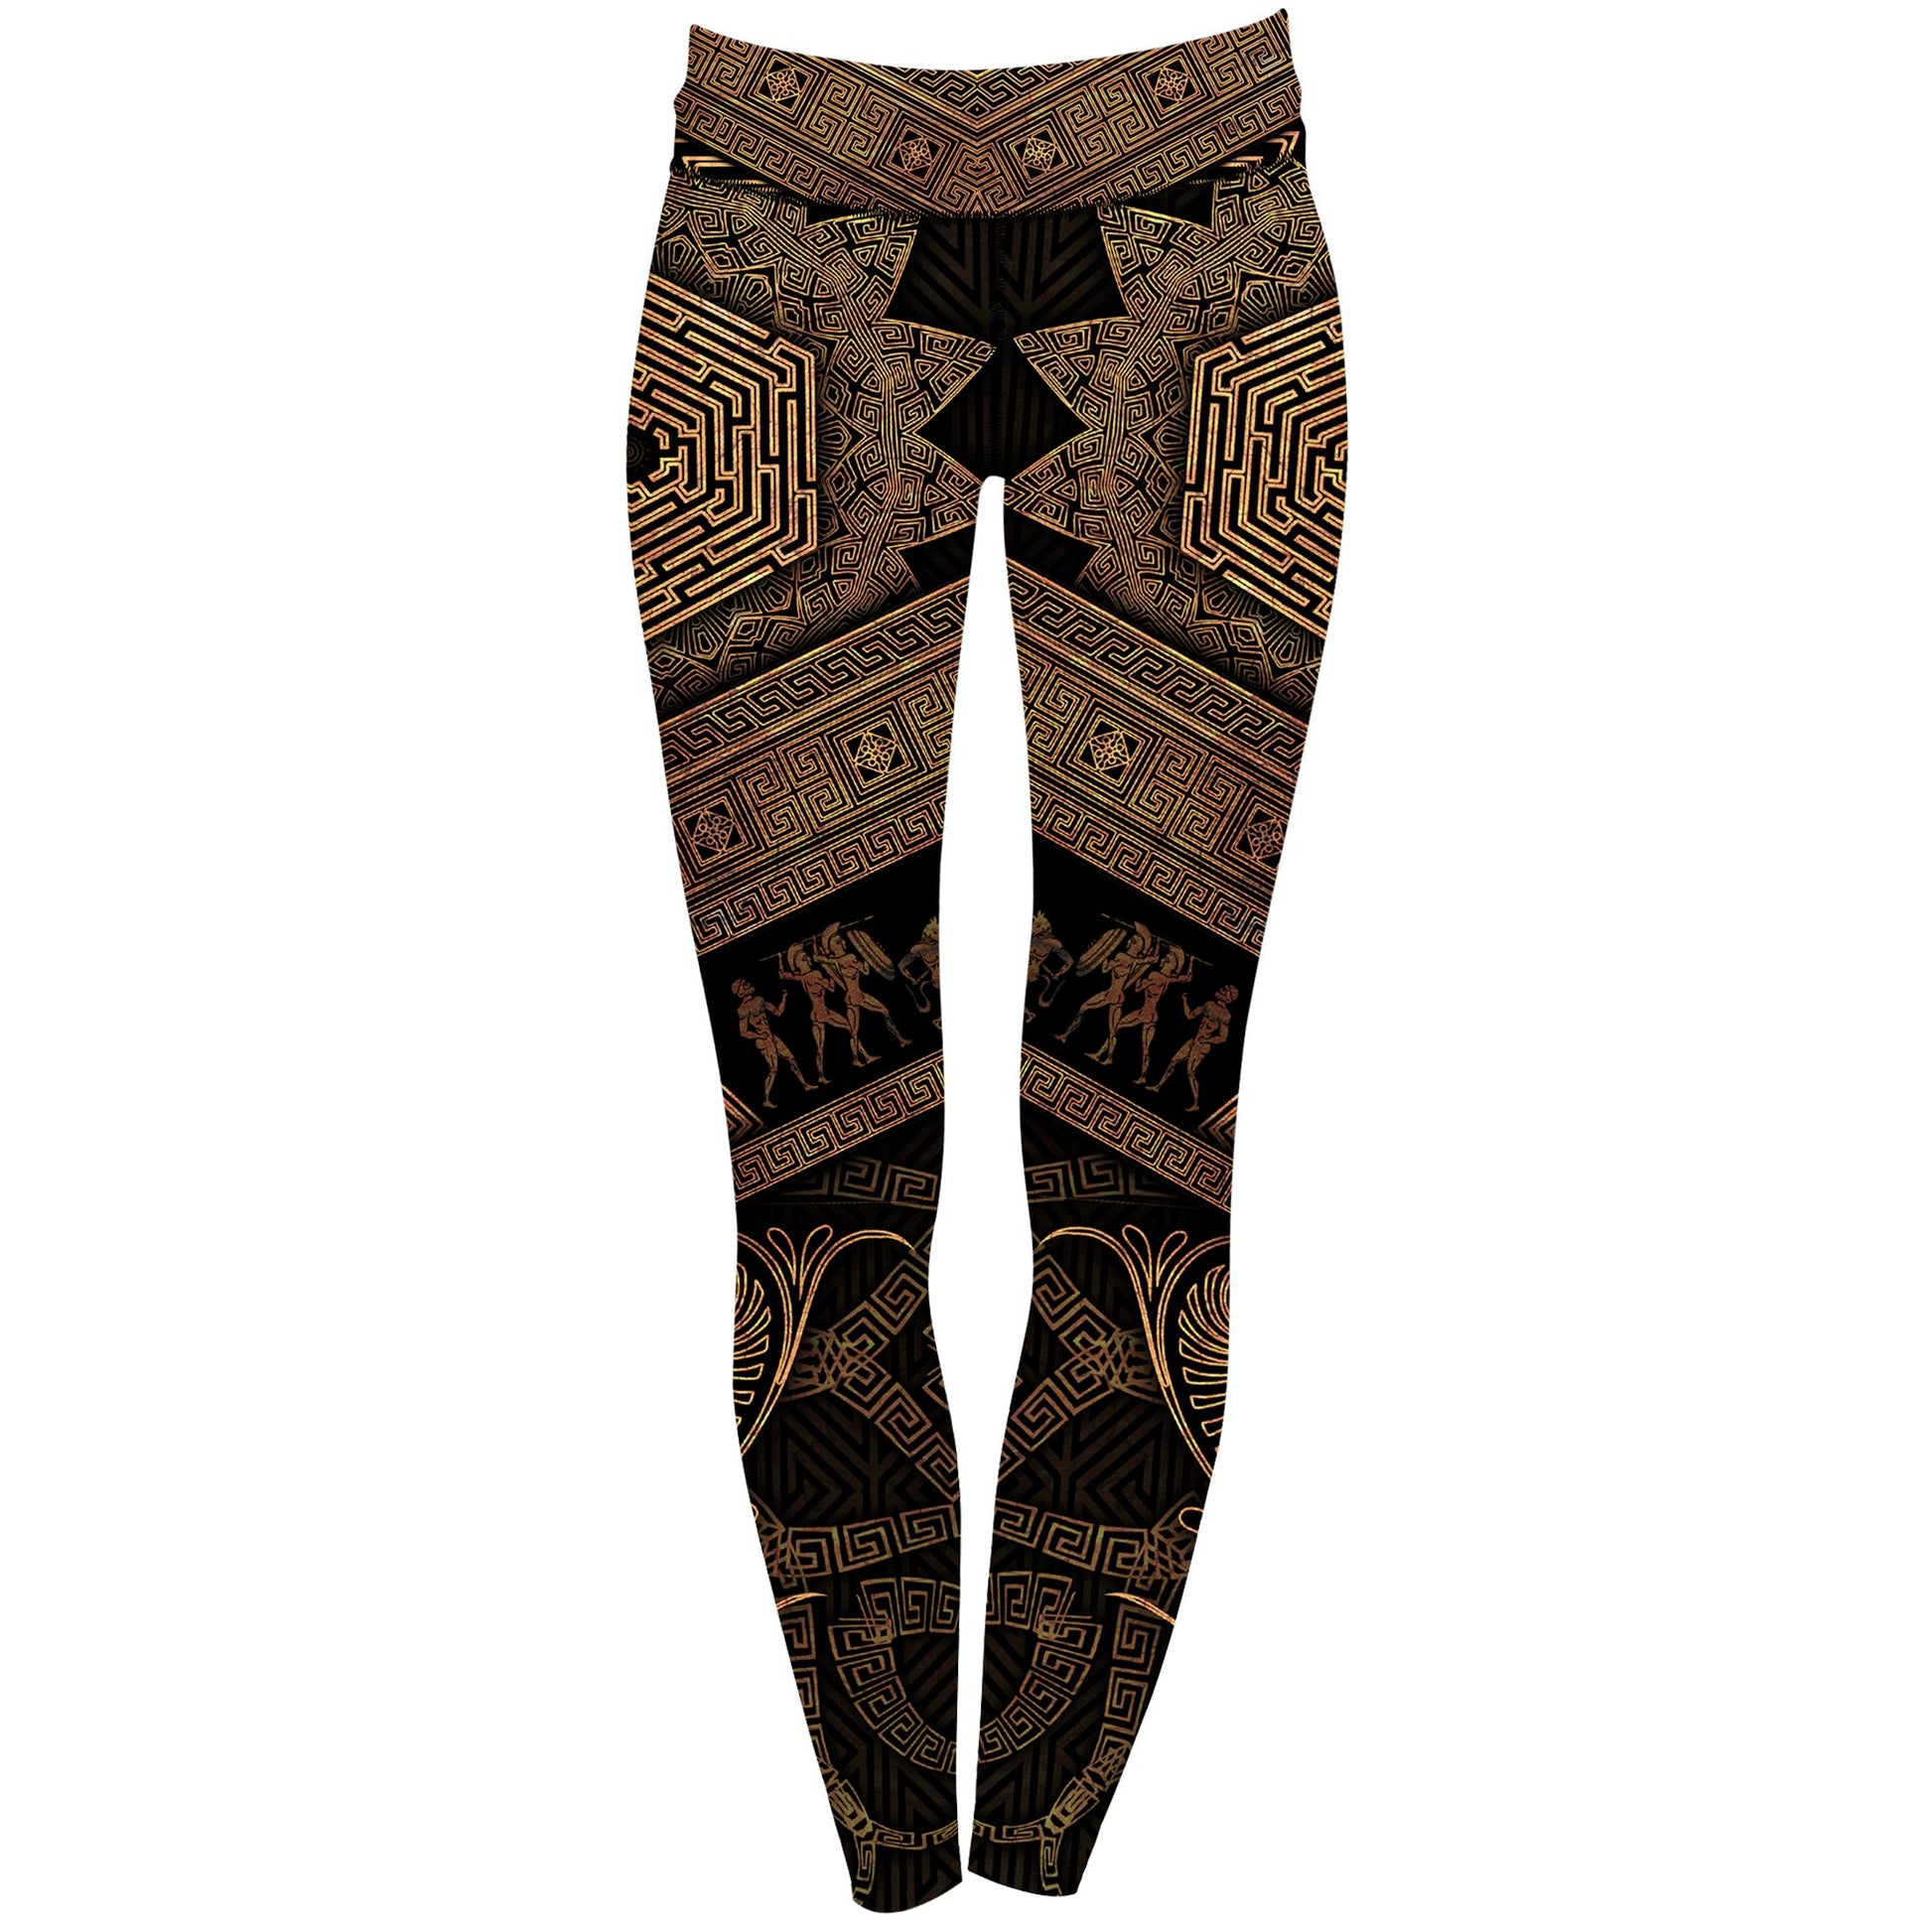 Vintage Russia Eagles Flags Women's Yoga Pants Leggings with